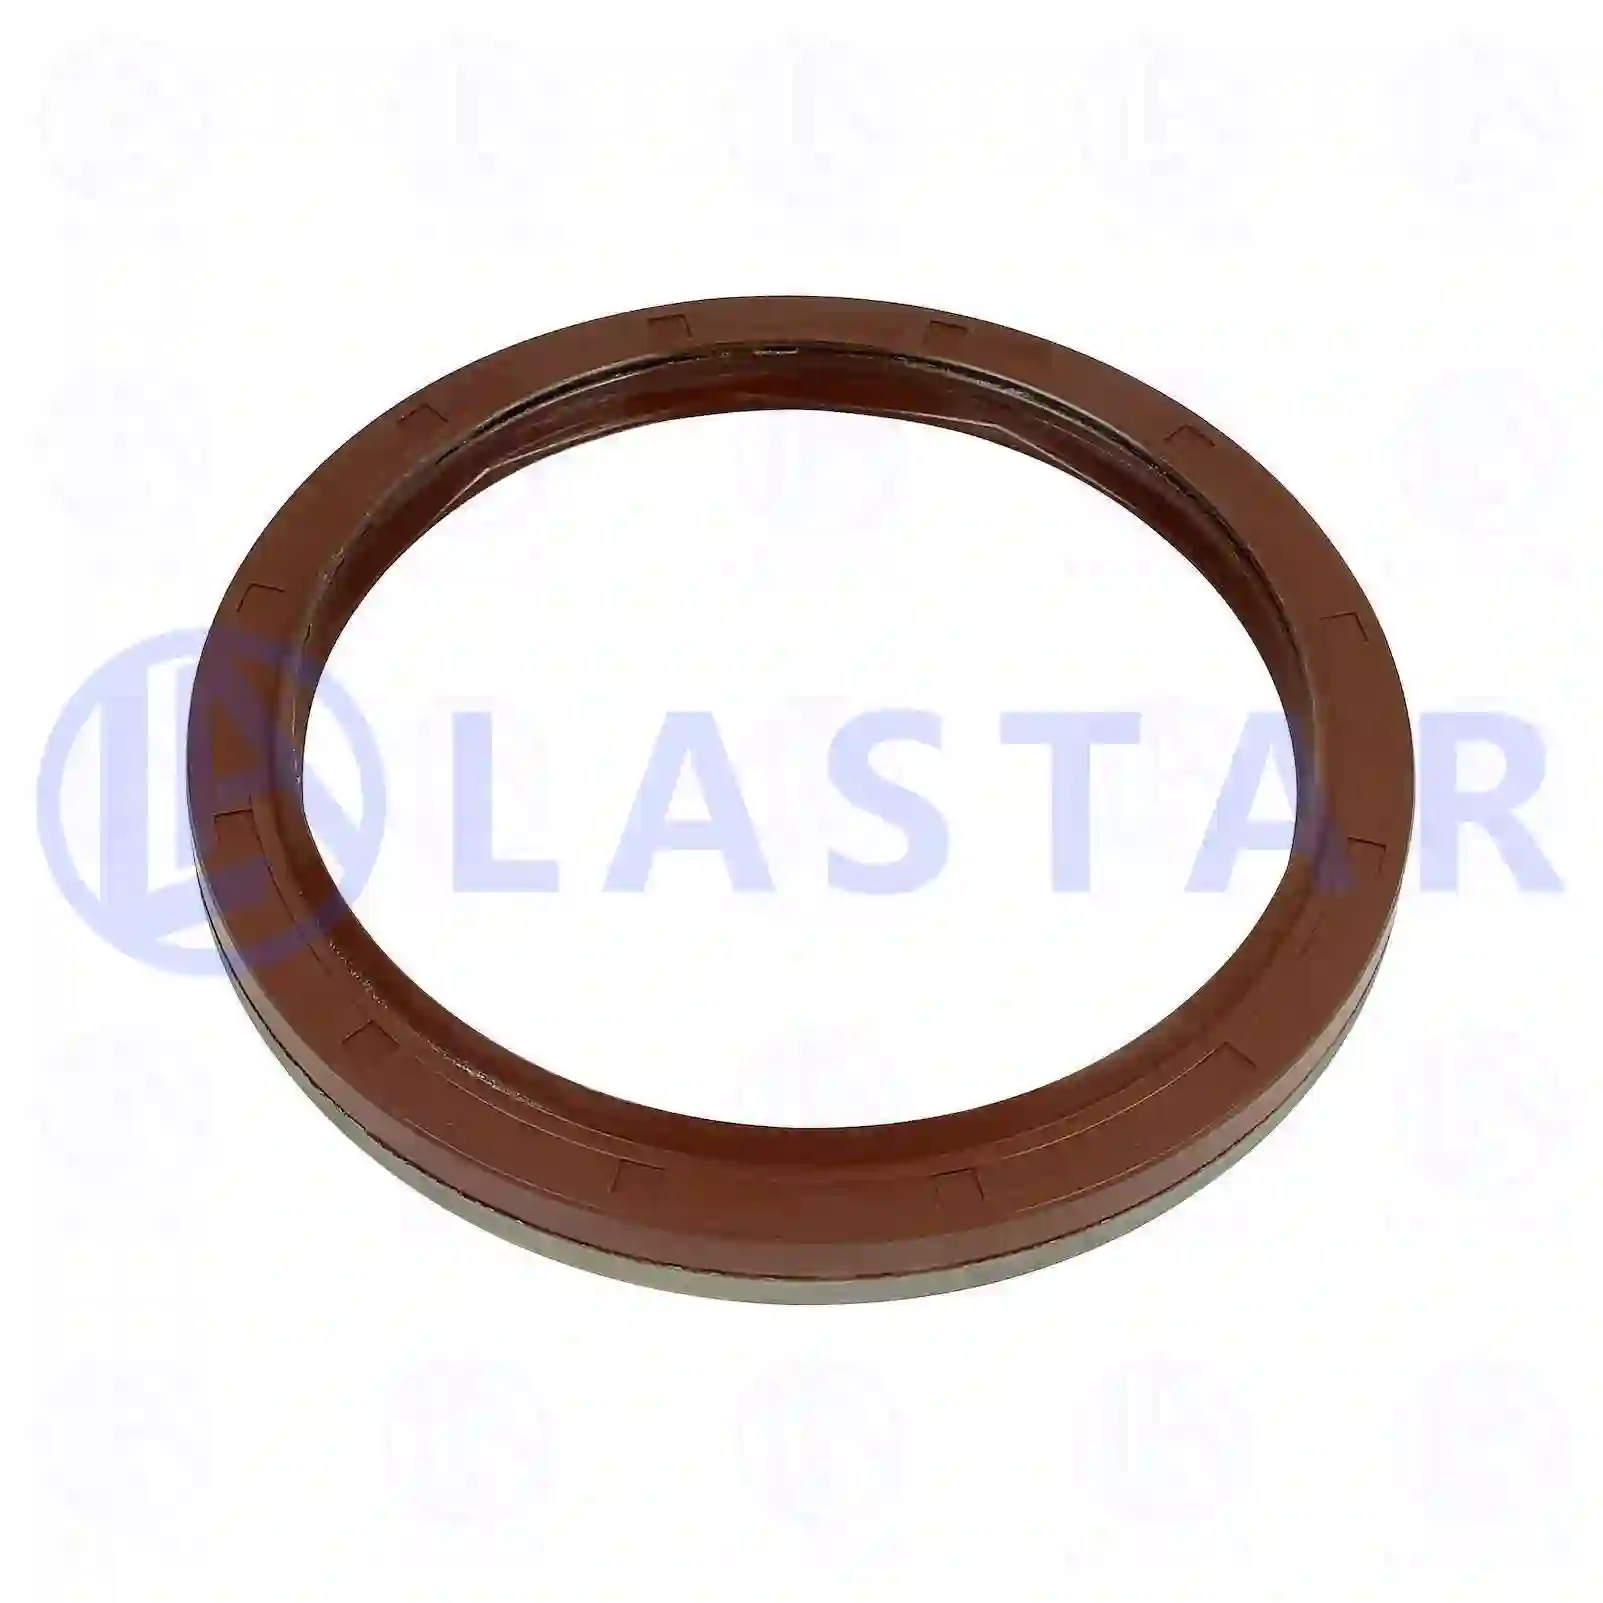 Oil seal, 77730577, 0119975546, 0209973947, 0259974147, , ||  77730577 Lastar Spare Part | Truck Spare Parts, Auotomotive Spare Parts Oil seal, 77730577, 0119975546, 0209973947, 0259974147, , ||  77730577 Lastar Spare Part | Truck Spare Parts, Auotomotive Spare Parts